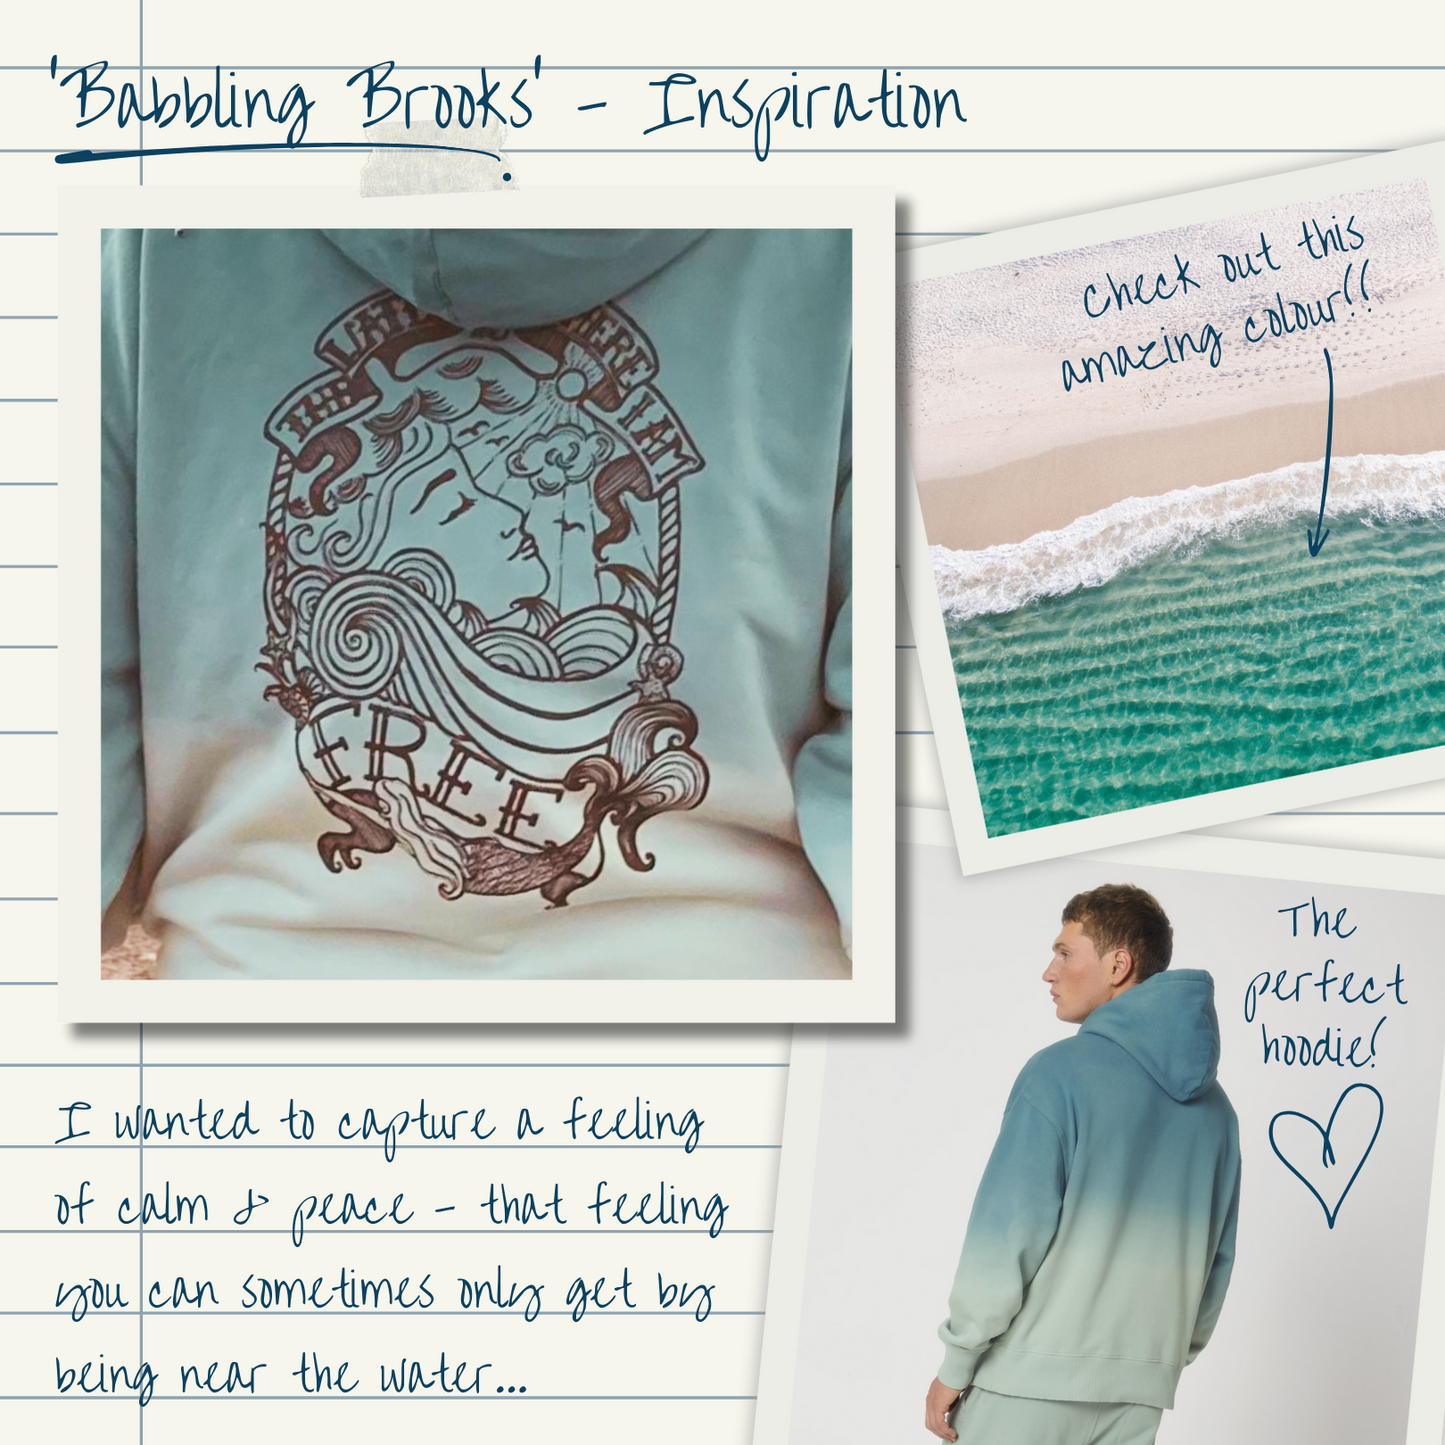 An ideas board showing the inspiration behind a hoodie design.